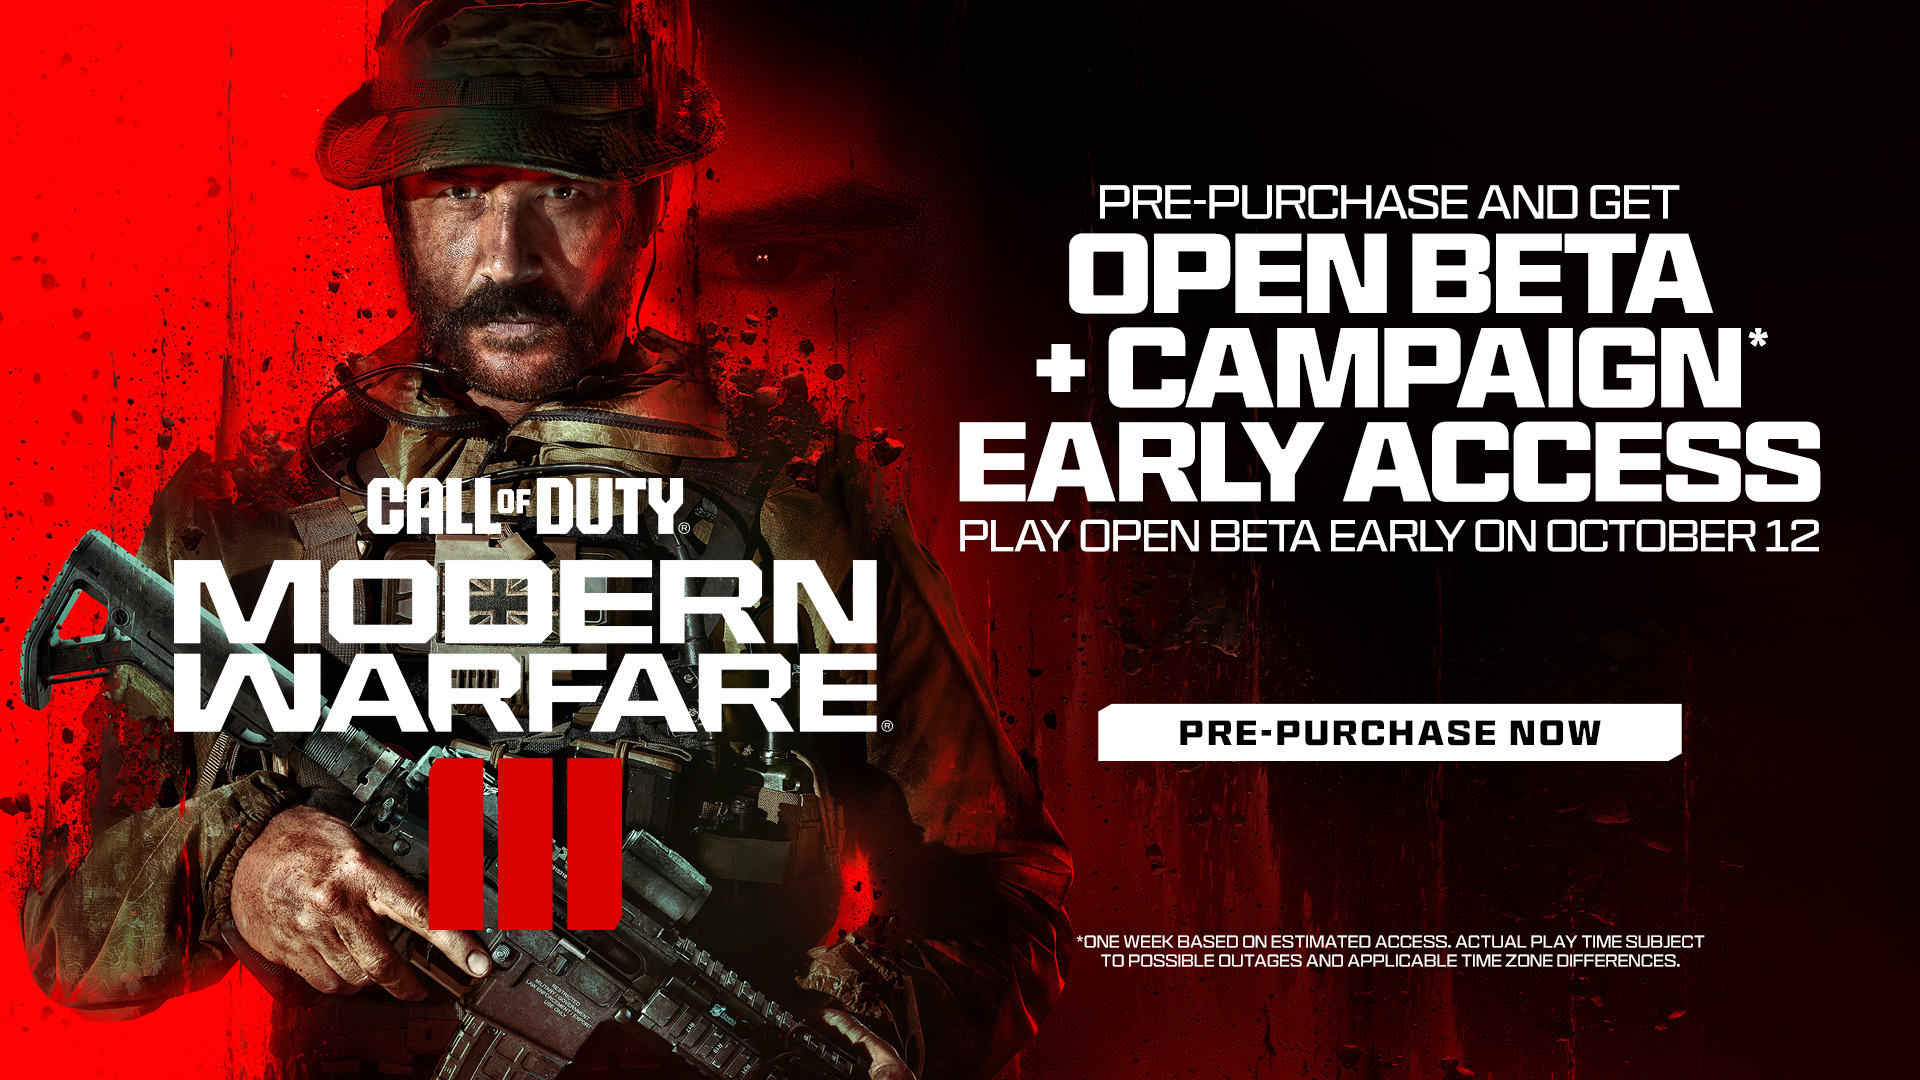 Call of Duty Next: Everything Announced for Modern Warfare III